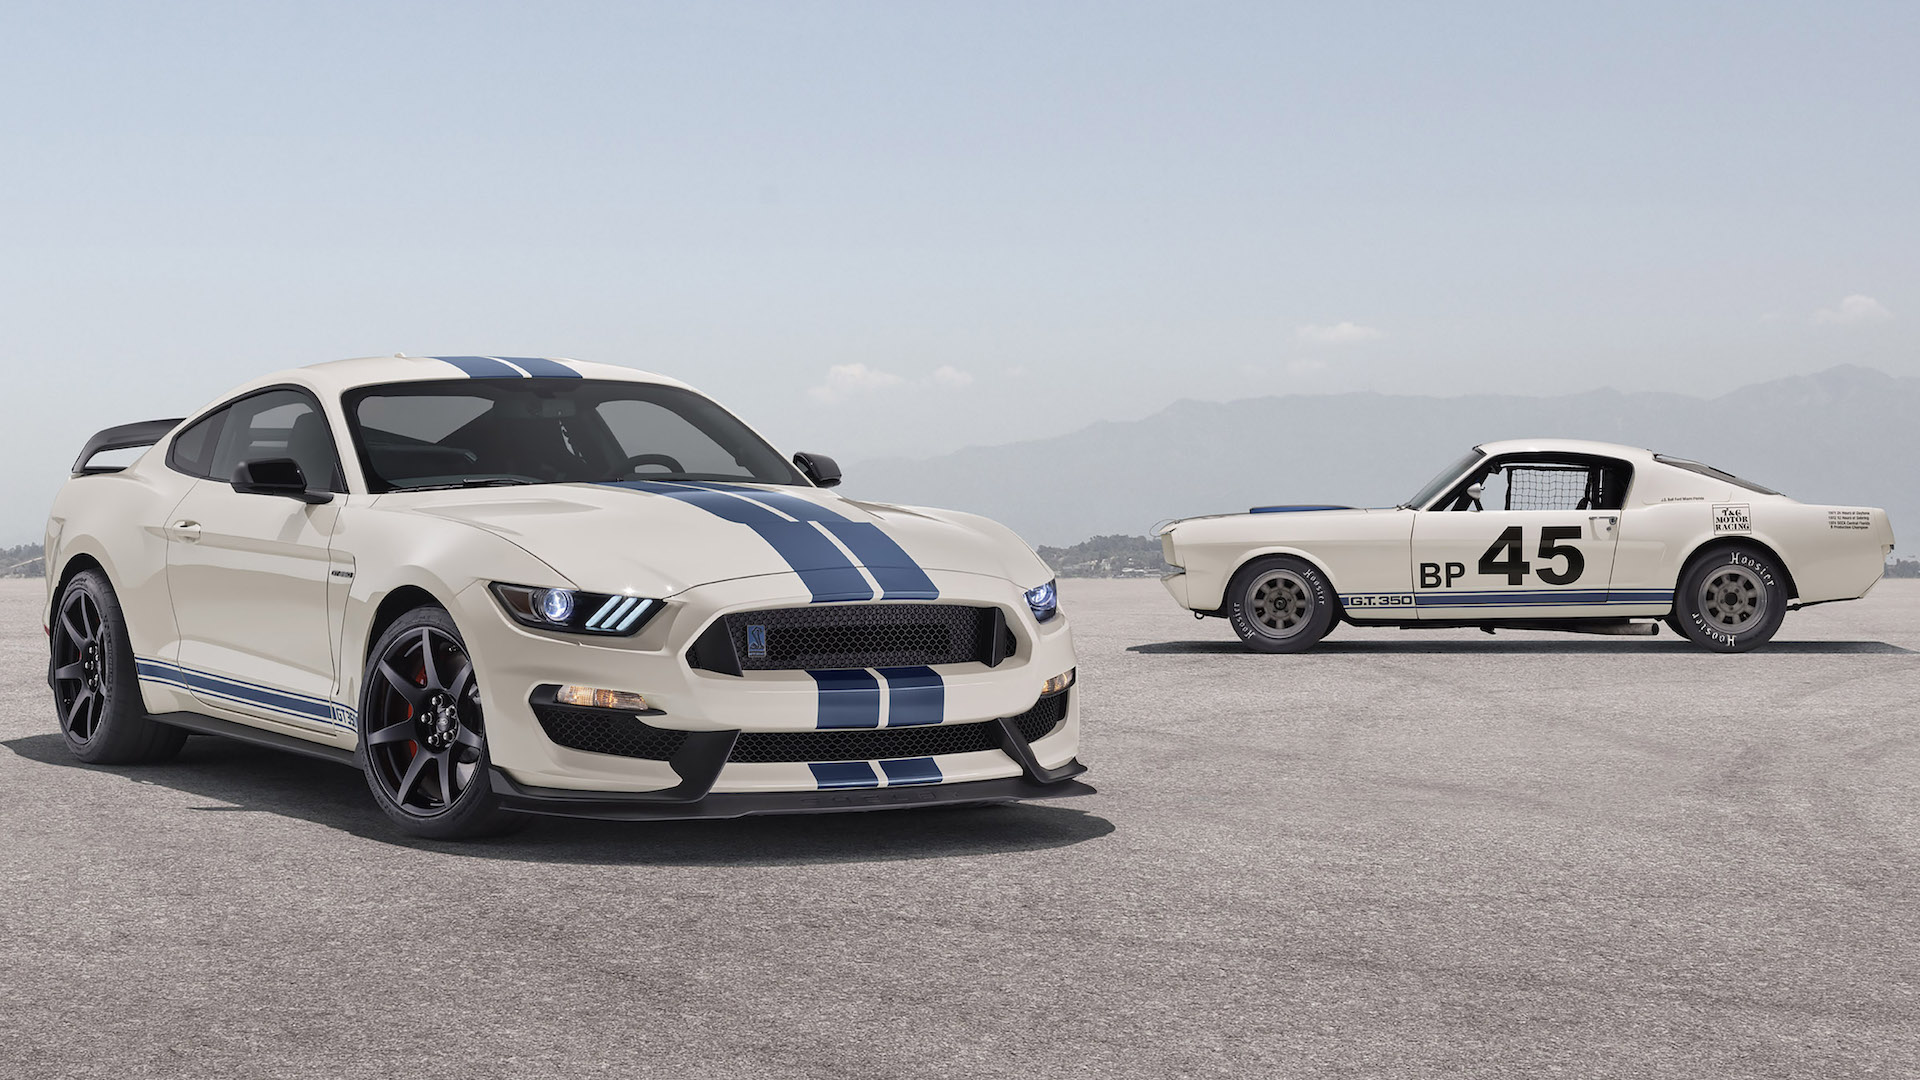 Ford Mustang Shelby Gt350 Heritage Edition Pays Homage To The